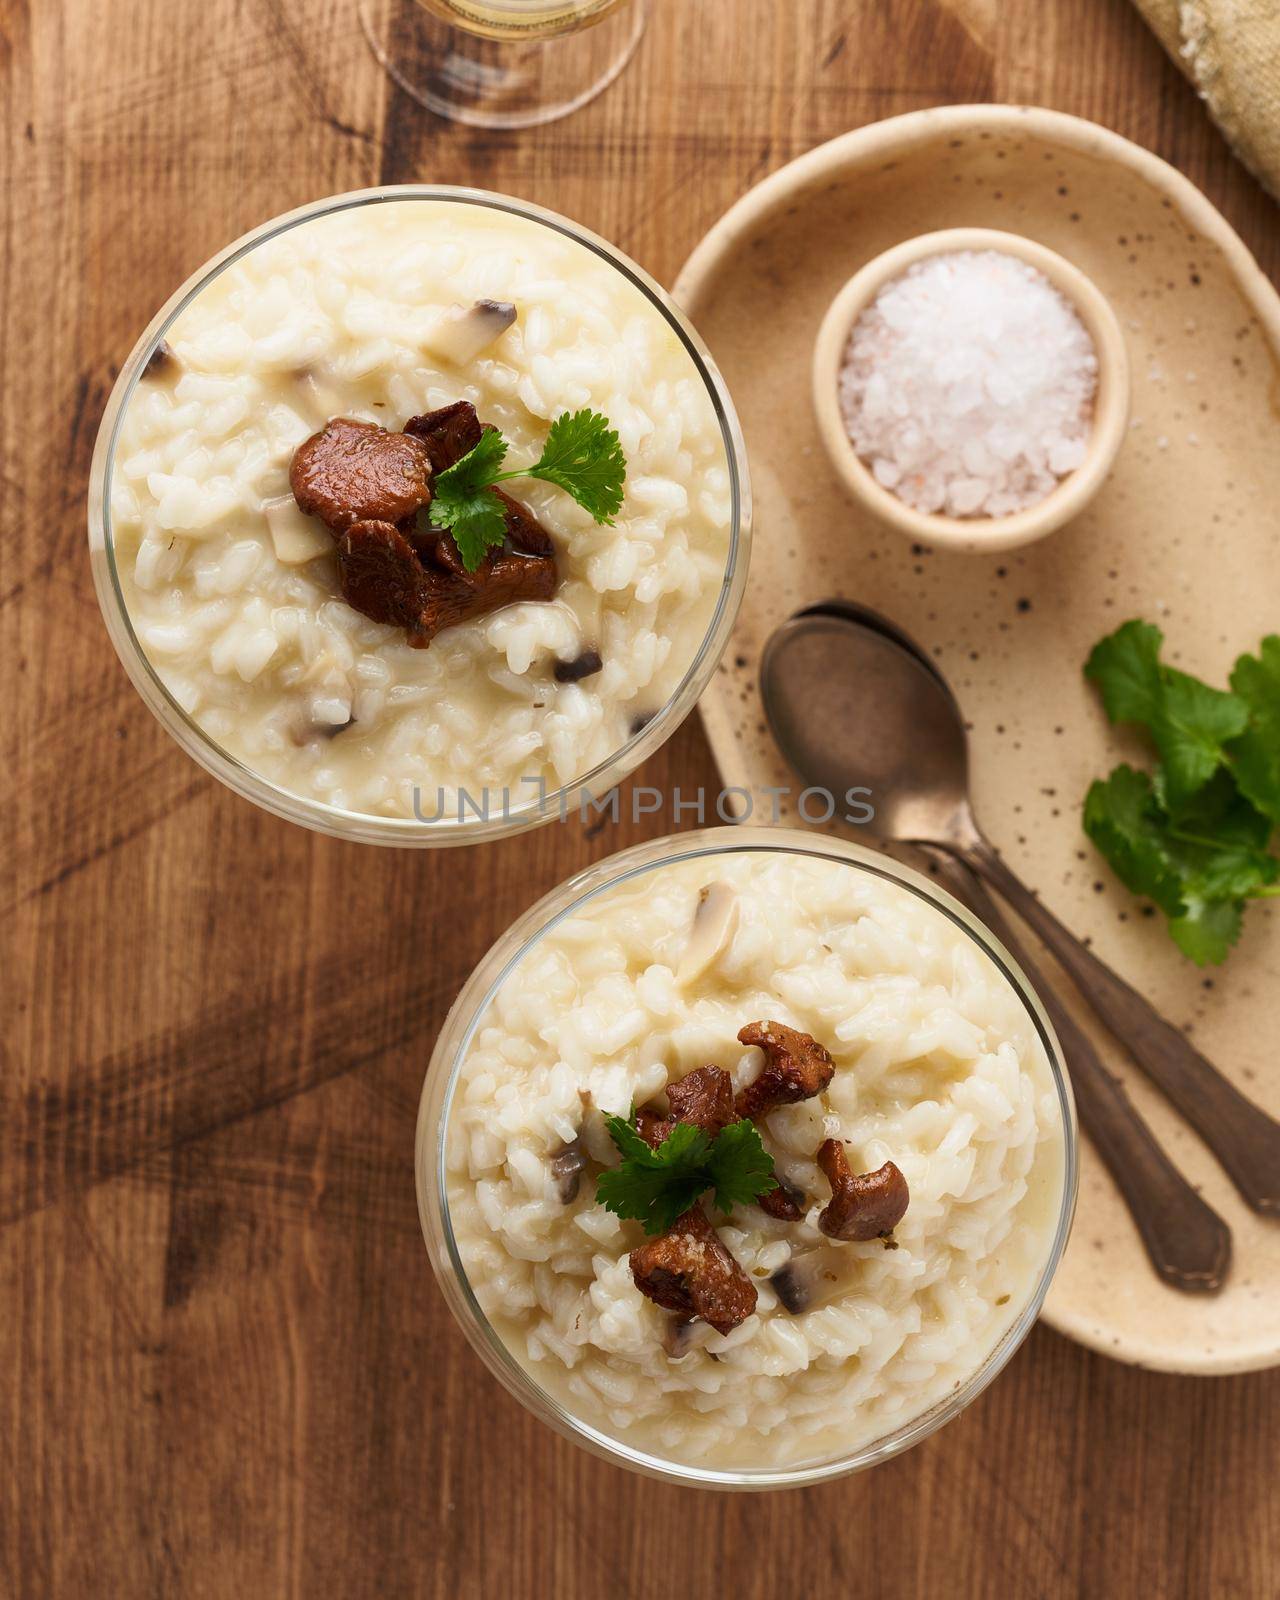 Risotto with mushrooms in wine glass. Unconventional unusual serving. Rice porridge with mushrooms. Wooden old table. Hot dish in glass bowl. Top view, selective focus